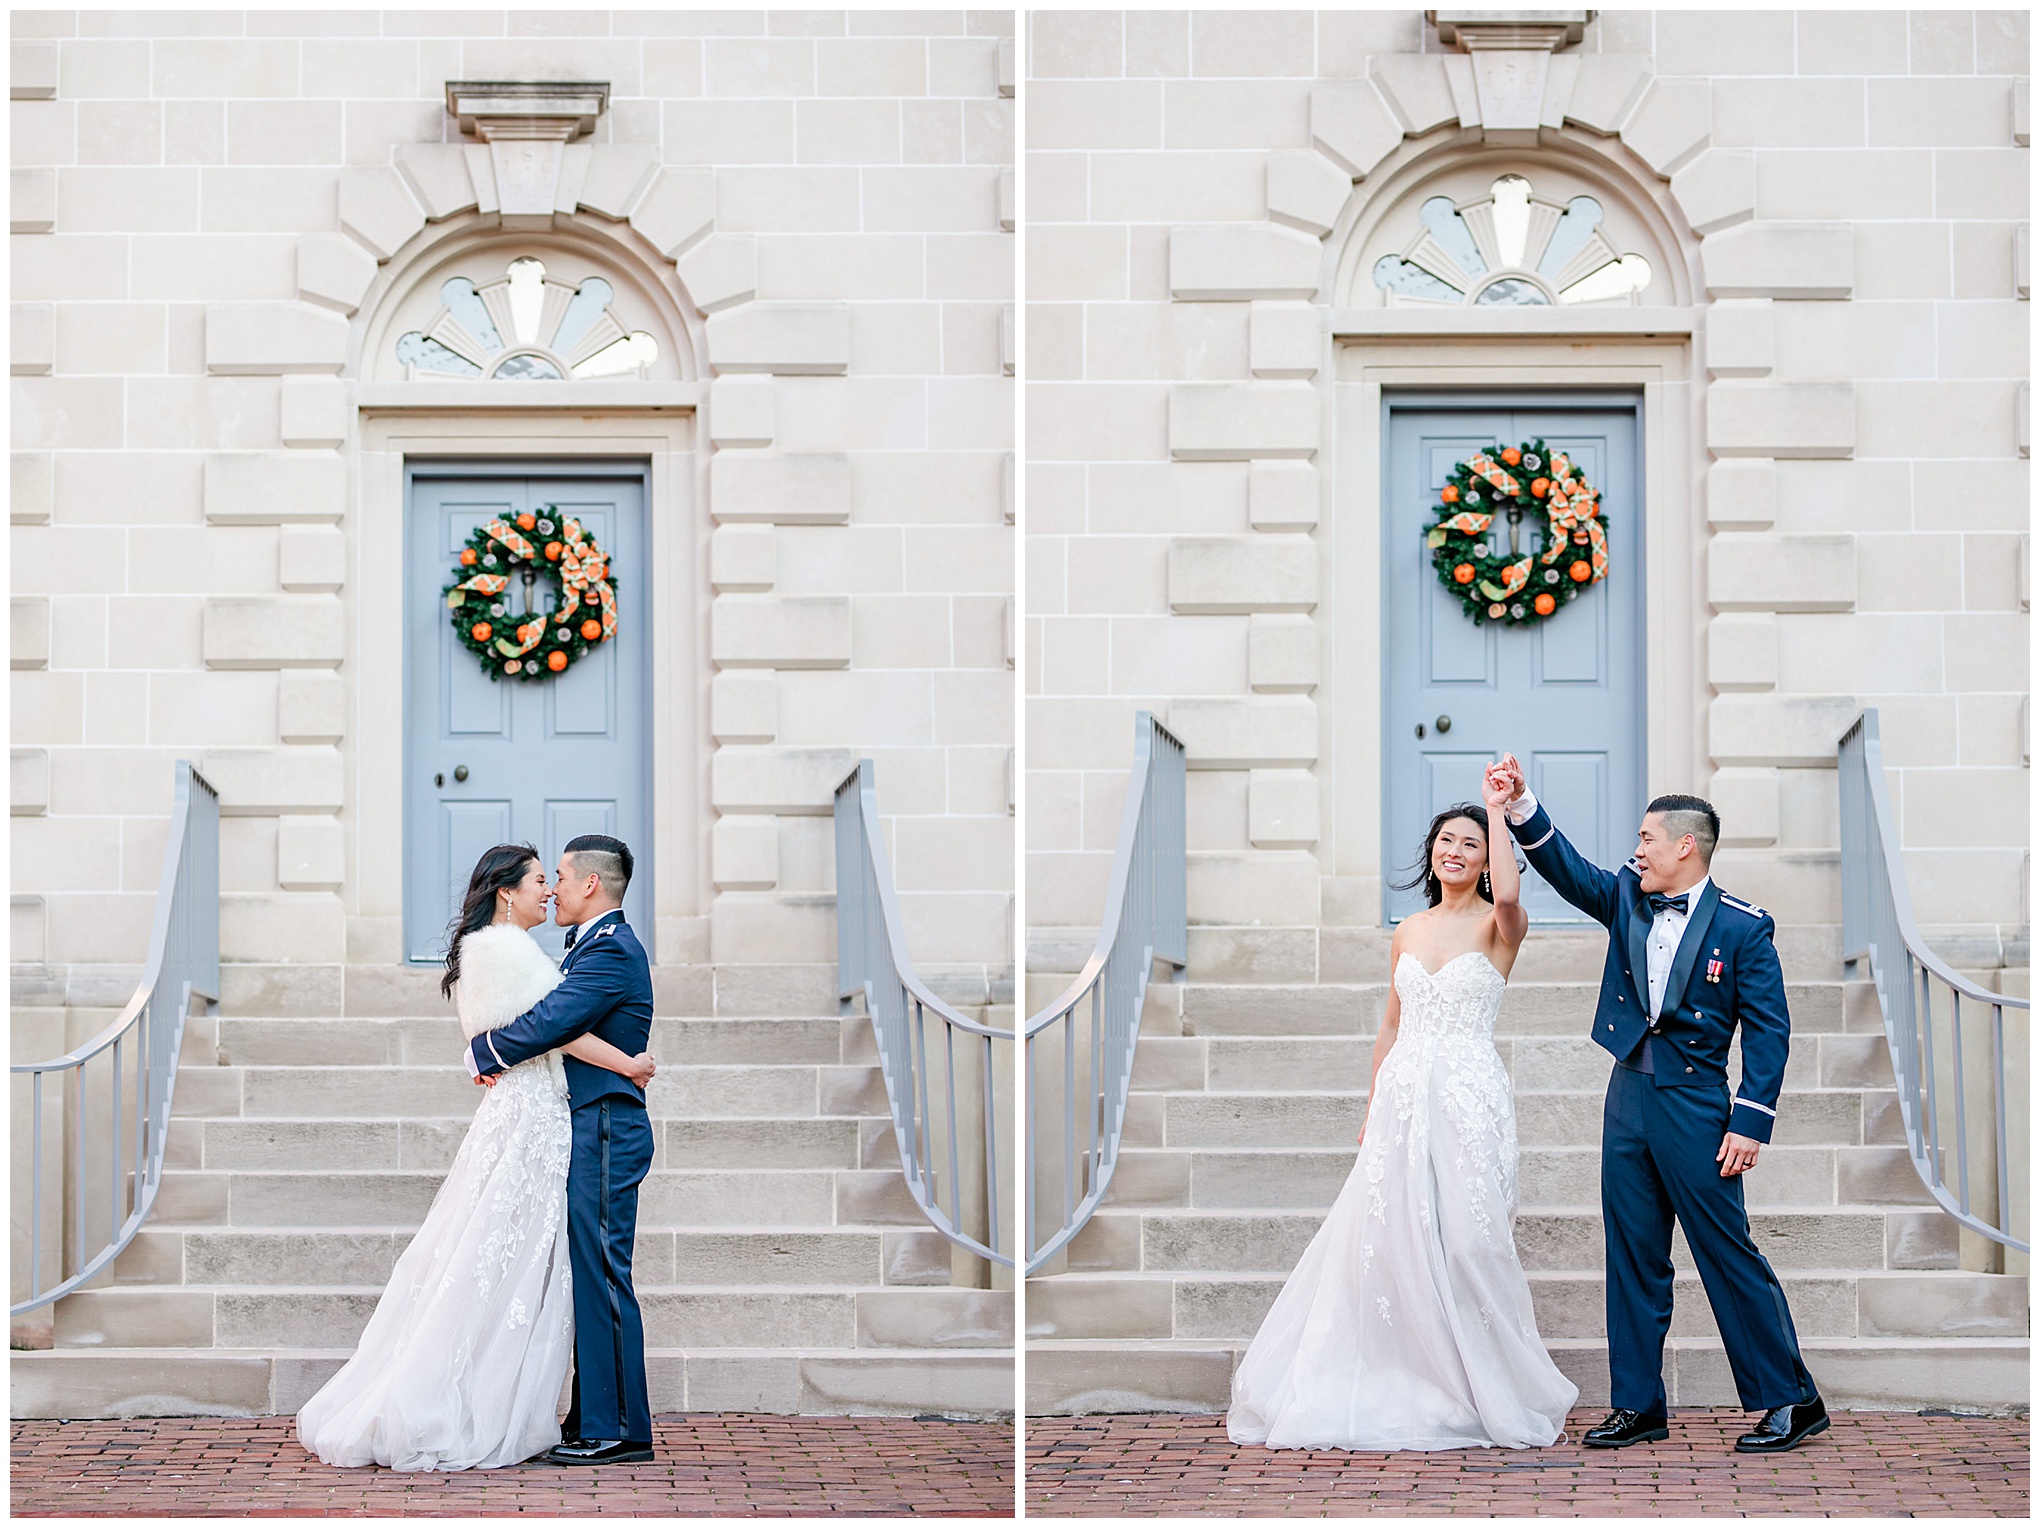 Old Town Alexandria elopement, Alexandria wedding photographer, Alexandria wedding, Old Town elopement, Alexandria courthouse wedding, Rachel E.H. Photography, winter elopement, winter wedding, military wedding, natural light wedding photography, classic wedding photos, simple wedding, newlywed portraits, Carlyle House, couple dancing